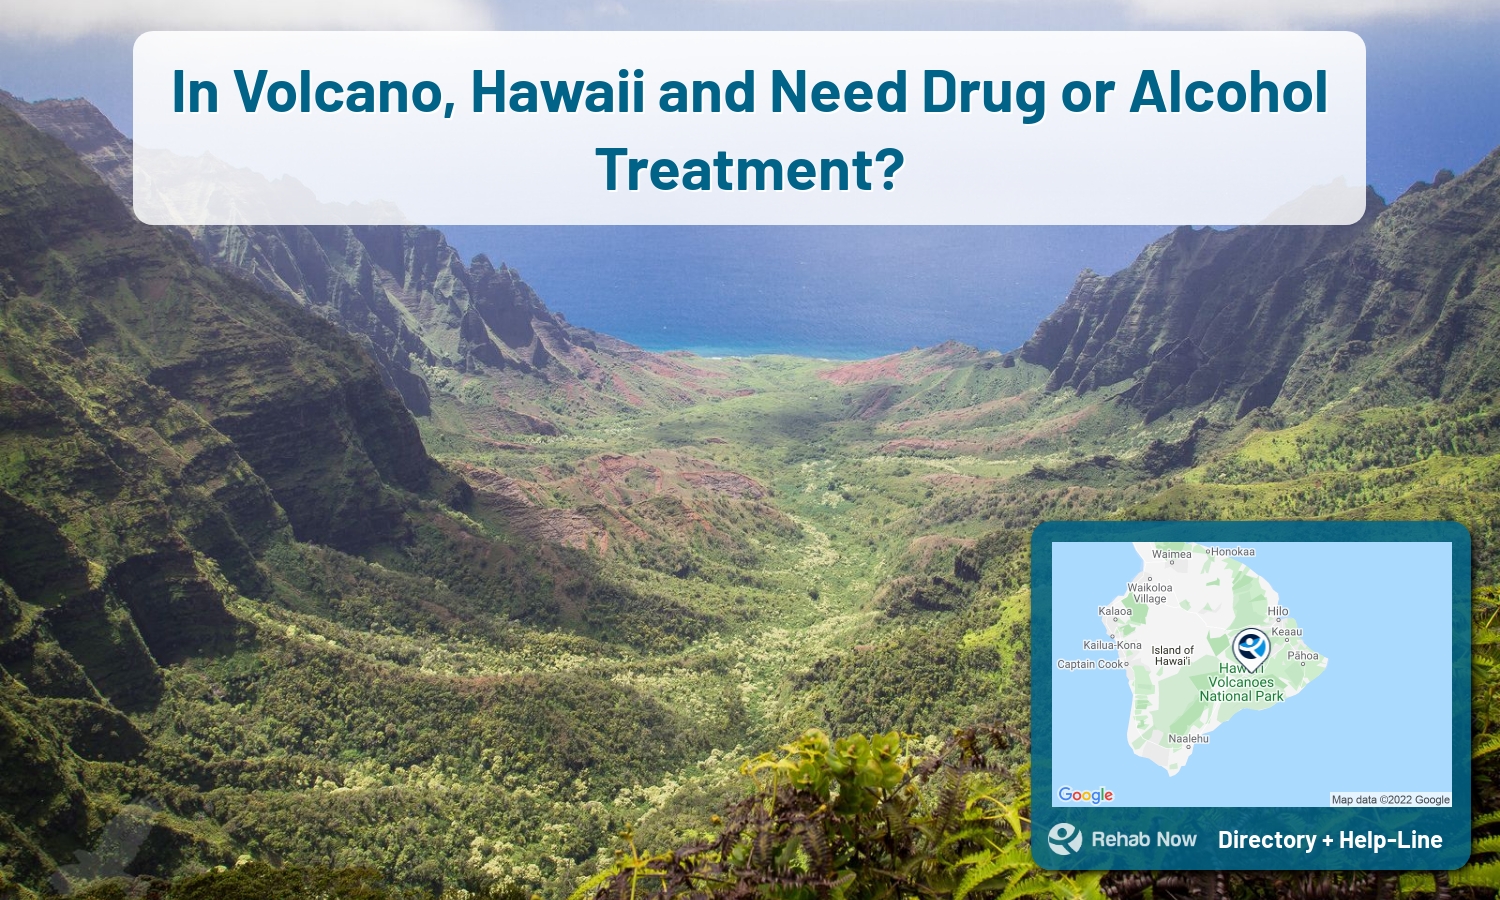 Let our expert counselors help find the best addiction treatment in Volcano, Hawaii for you or a loved one now with a free call to our hotline.